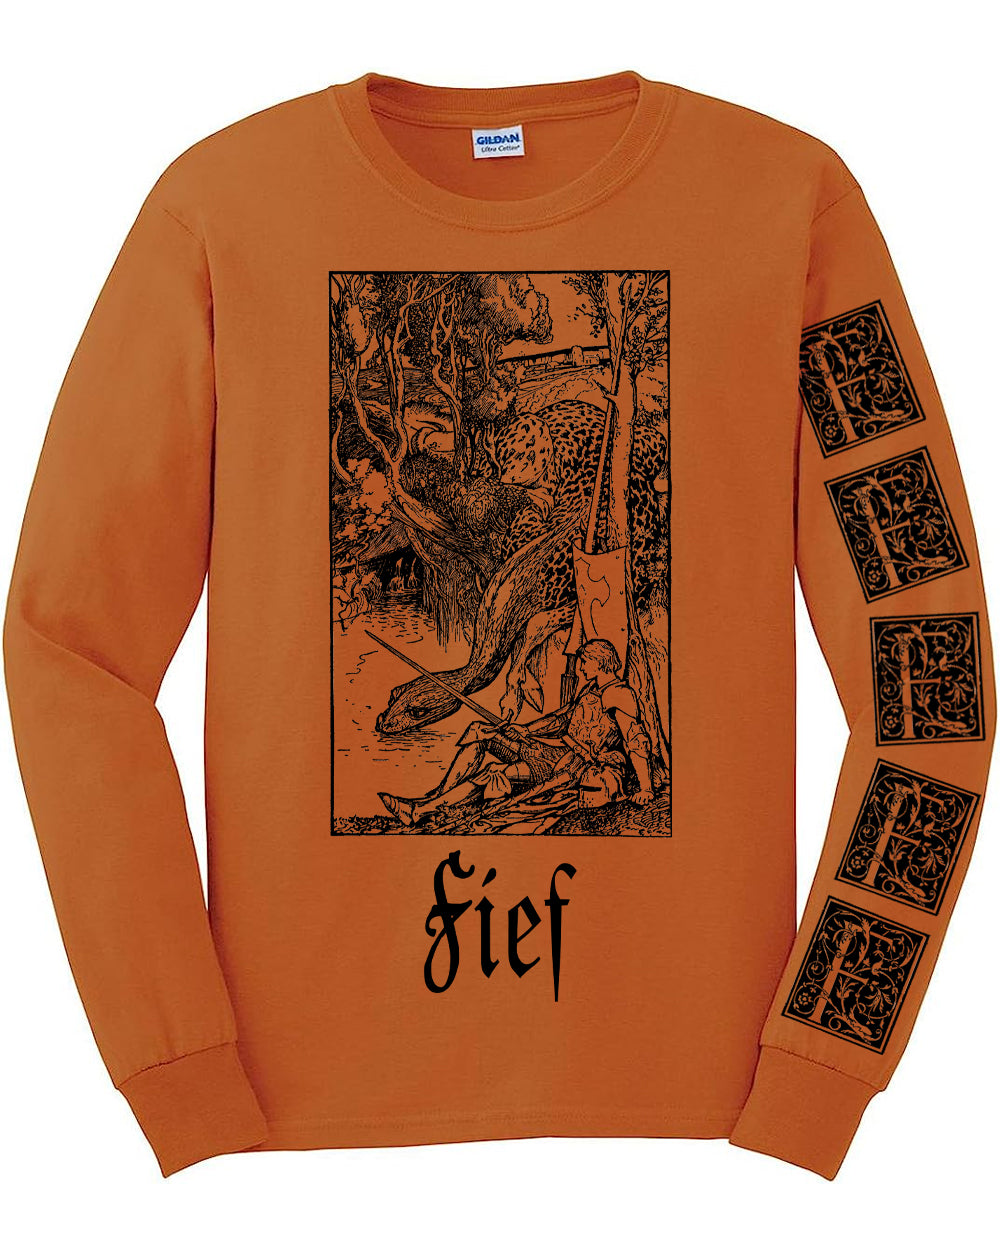 *RESTOCKED* FIEF "To Rest in the Shade of Dragon Wings" Long Sleeve Shirt [BURNT ORANGE]